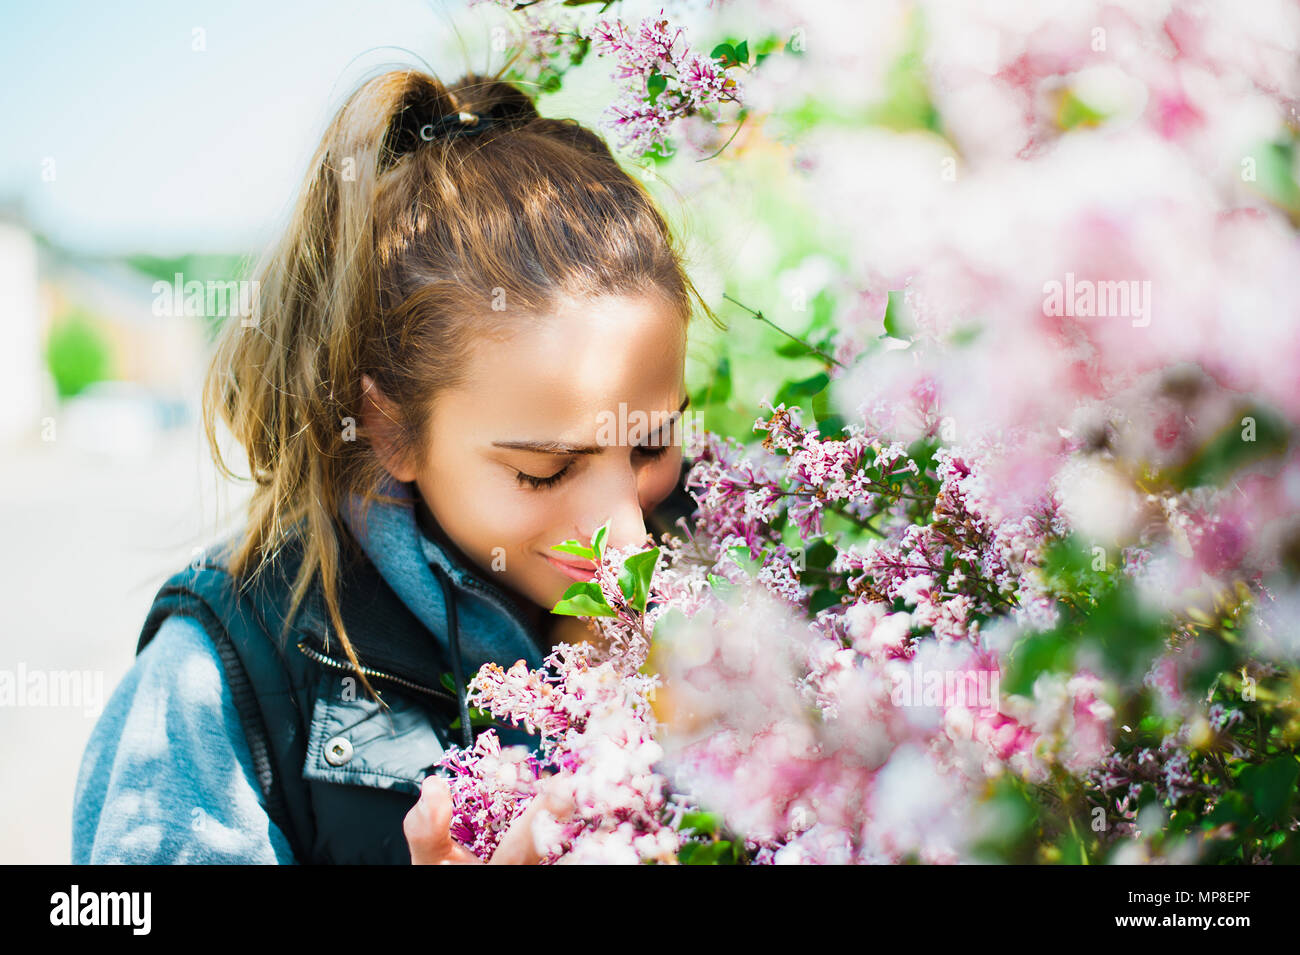 Beautiful, young woman smelling flowers Stock Photo